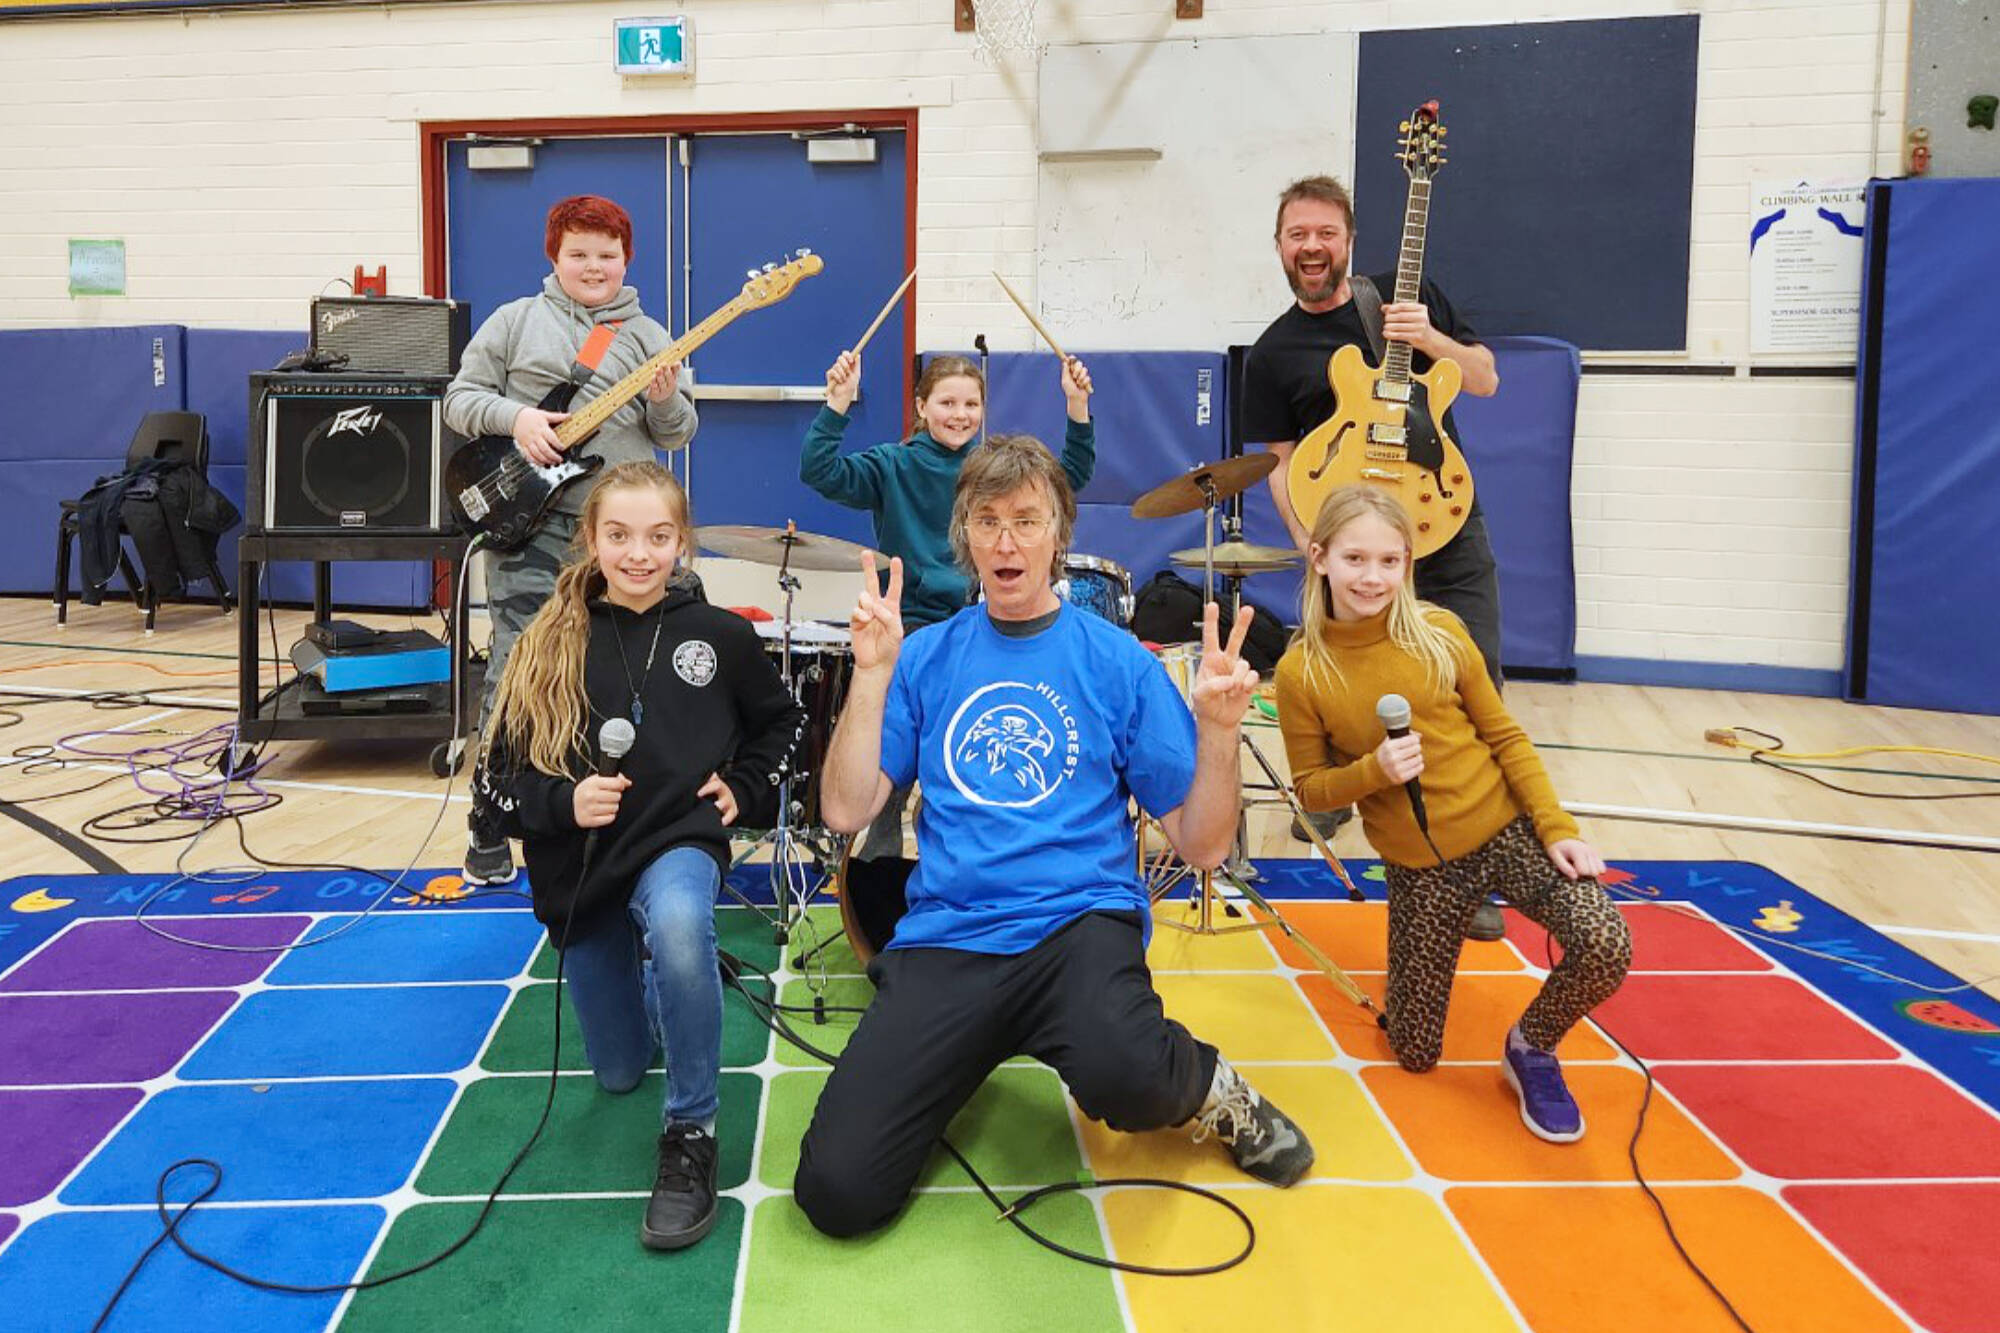 Sloan vocalist/bassist Chris Murphy shares a moment with Hillcrest Elementary teacher Brook Roberts and students Theiadh Beaumont, Olivia Coyne, Alexander Buchanan and Alix Kraft on Monday, March 6. The students played the band’s hit, The Rest of My Life, in the school’s video entry for the recent CBC Music Class Challenge. Murphy spent the afternoon at the school on Monday, following Sloan’s Sunday night concert at Song Sparrow Hall. (Contributed)